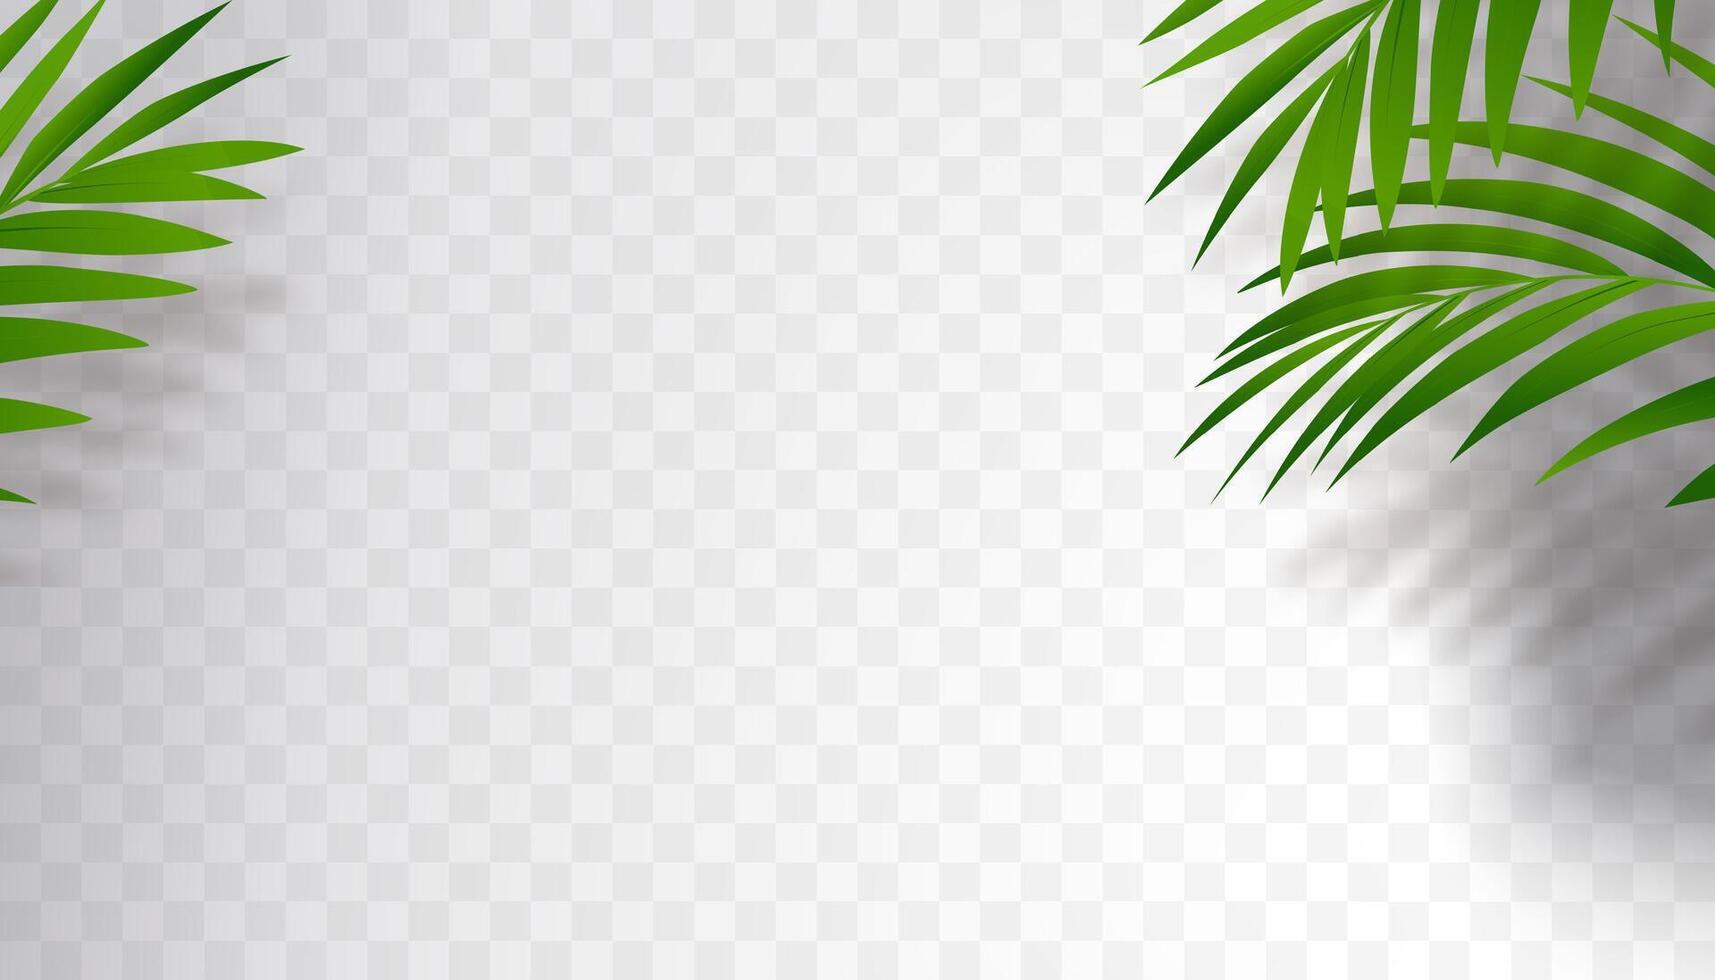 Leaves shadow silhouette,Abstract Branches Palm leaf shadow reflection,Tropical Leaf element for overlay on Mockup Product Presentation vector